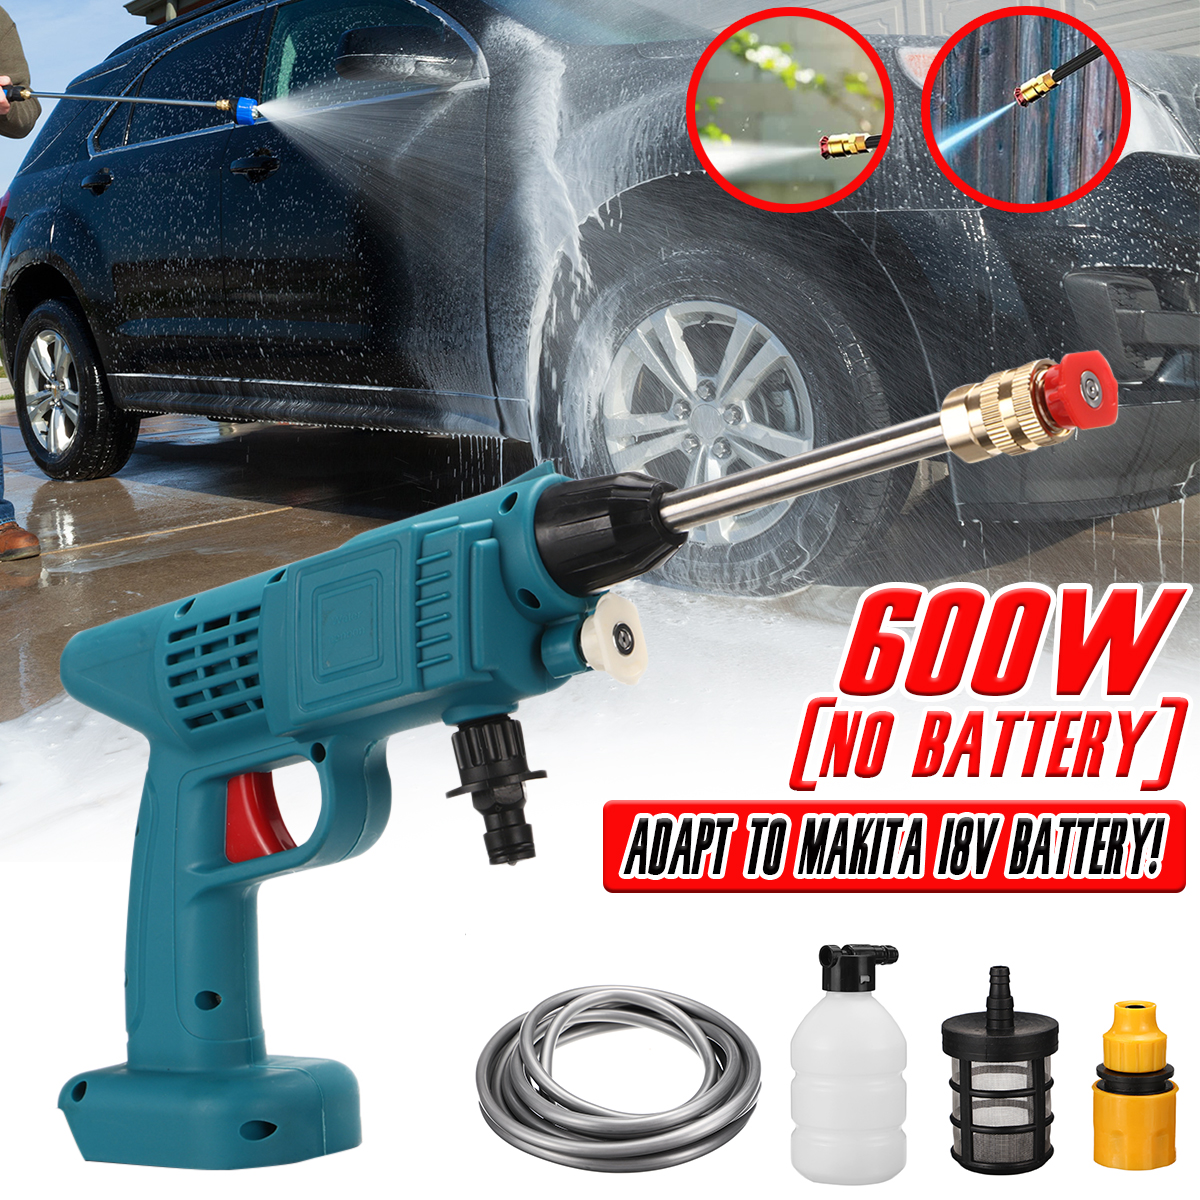 24V-600W-Portable-Cordless-Car-Washer-High-Pressure-Car-Household-Washer-Cleaner-Spray-Guns-Pumps-To-1901471-2